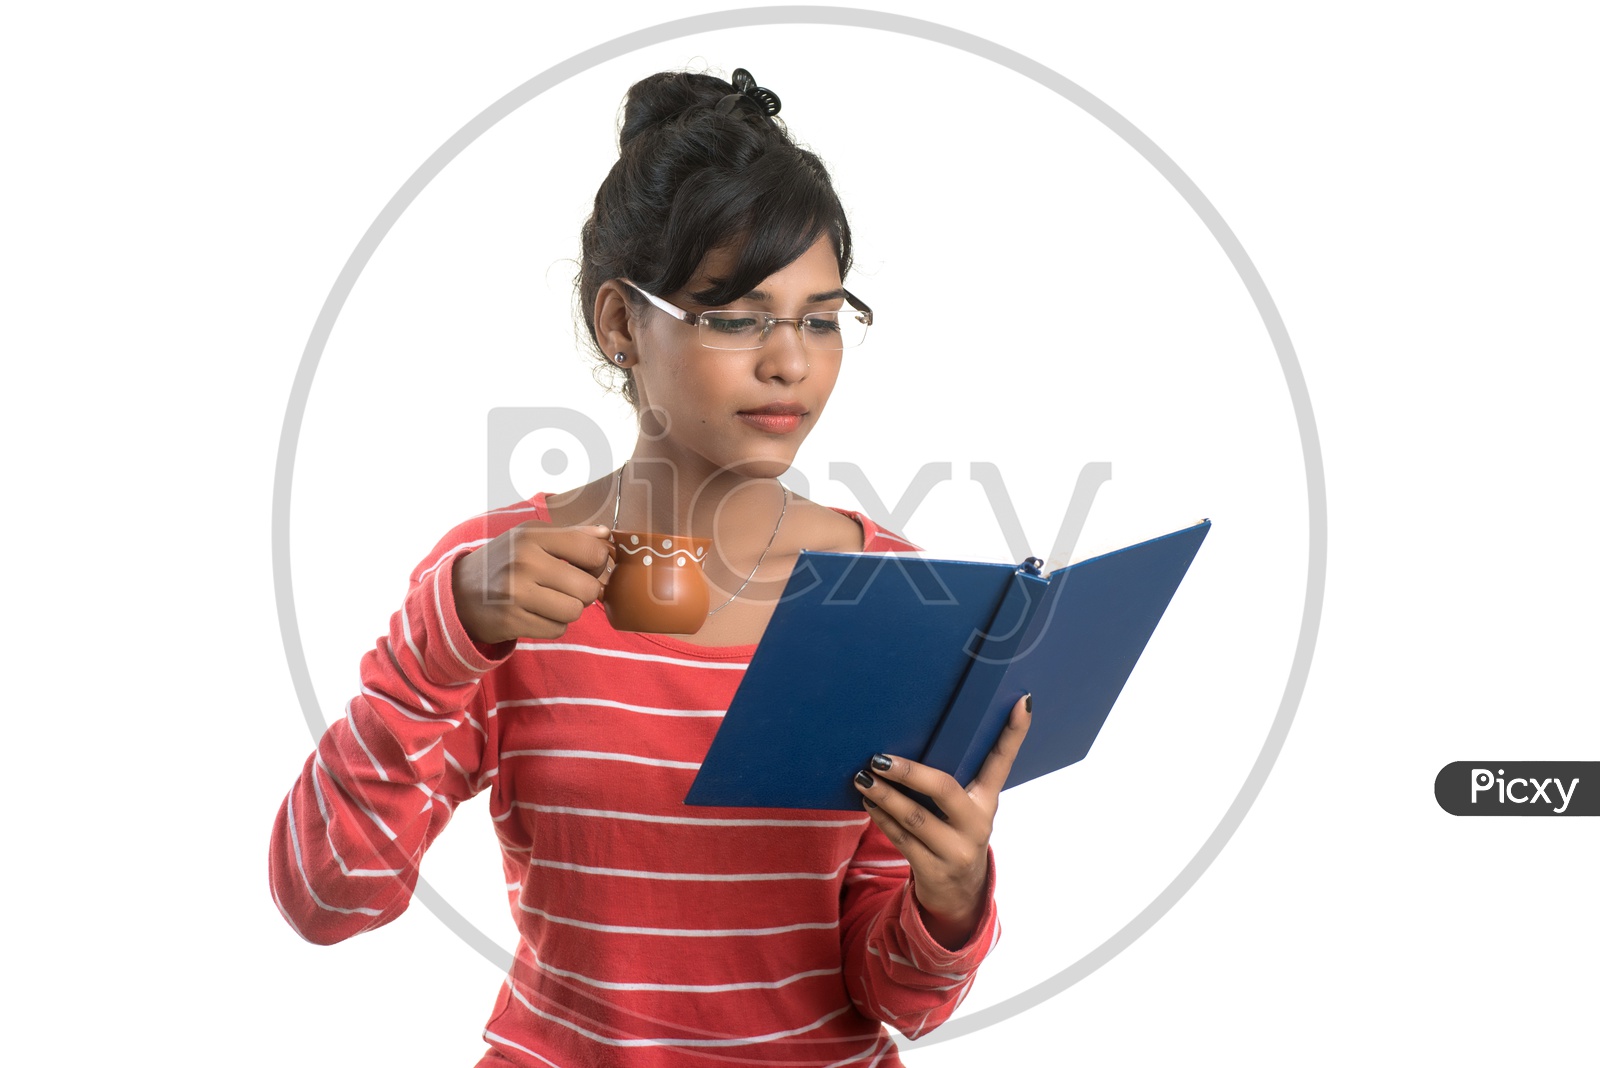 Pretty Young Girl Student Holding Book and a Cup Of Tea or Coffee and  Posing on an isolated White Background